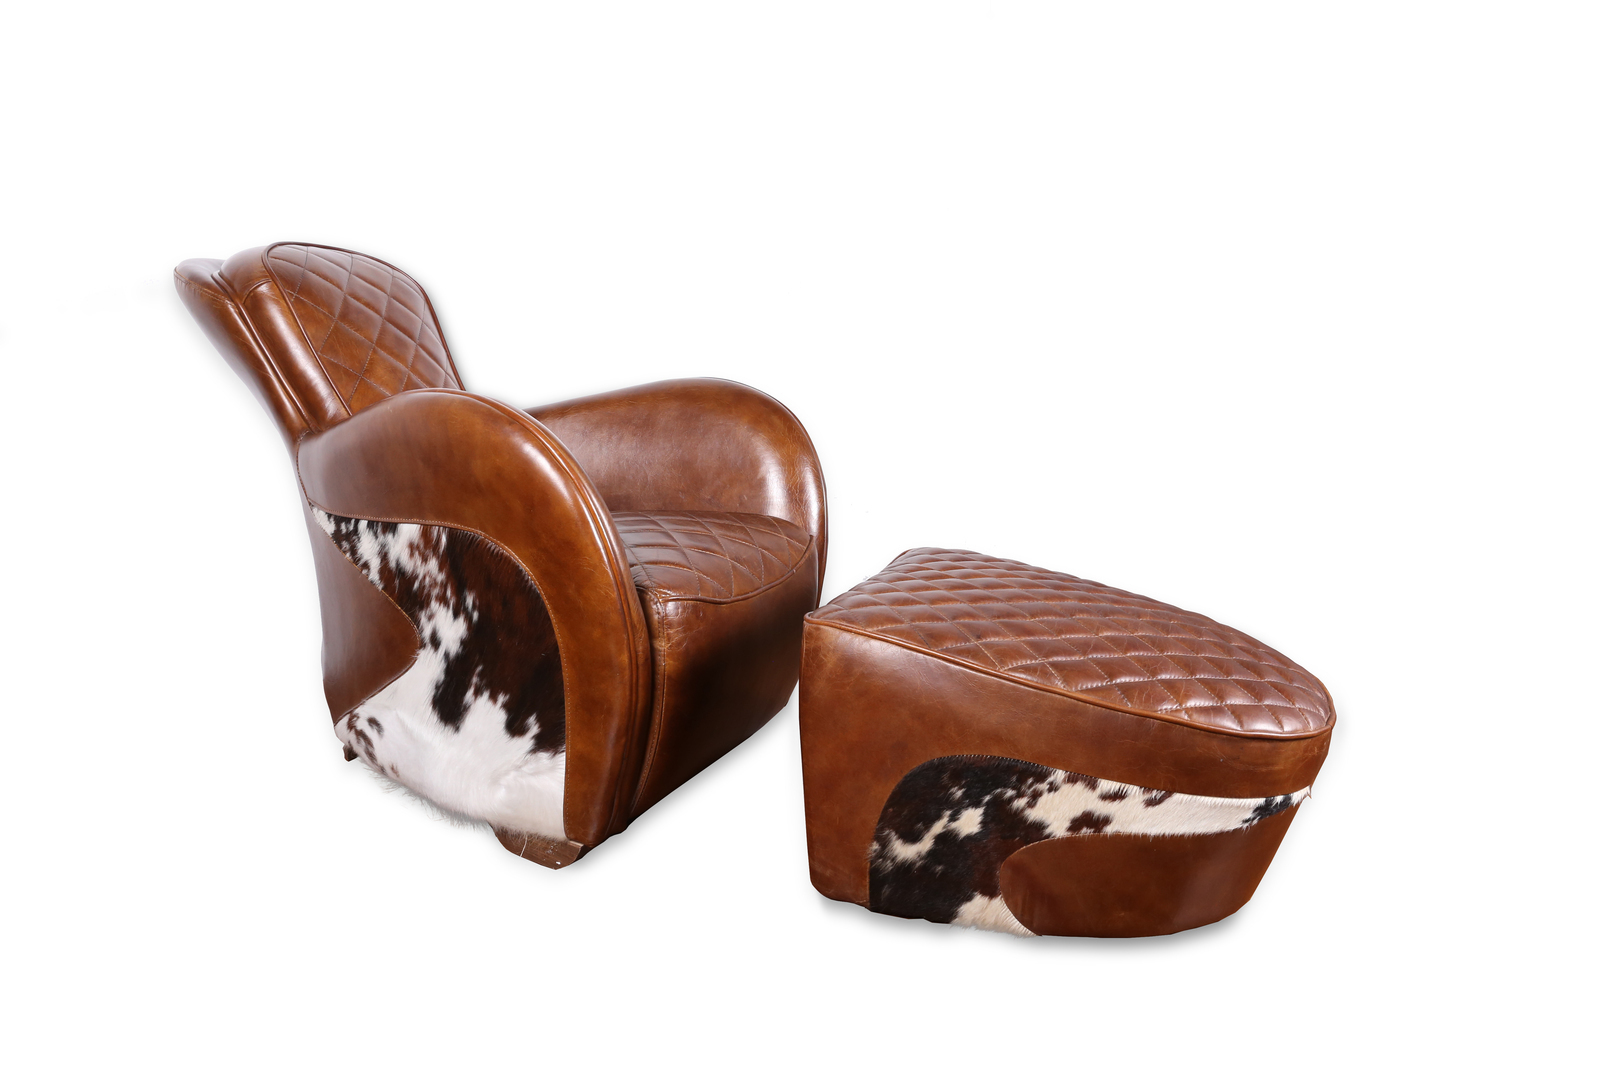 Saddle Brown Leather Cowhide Occasional Chair With Stool